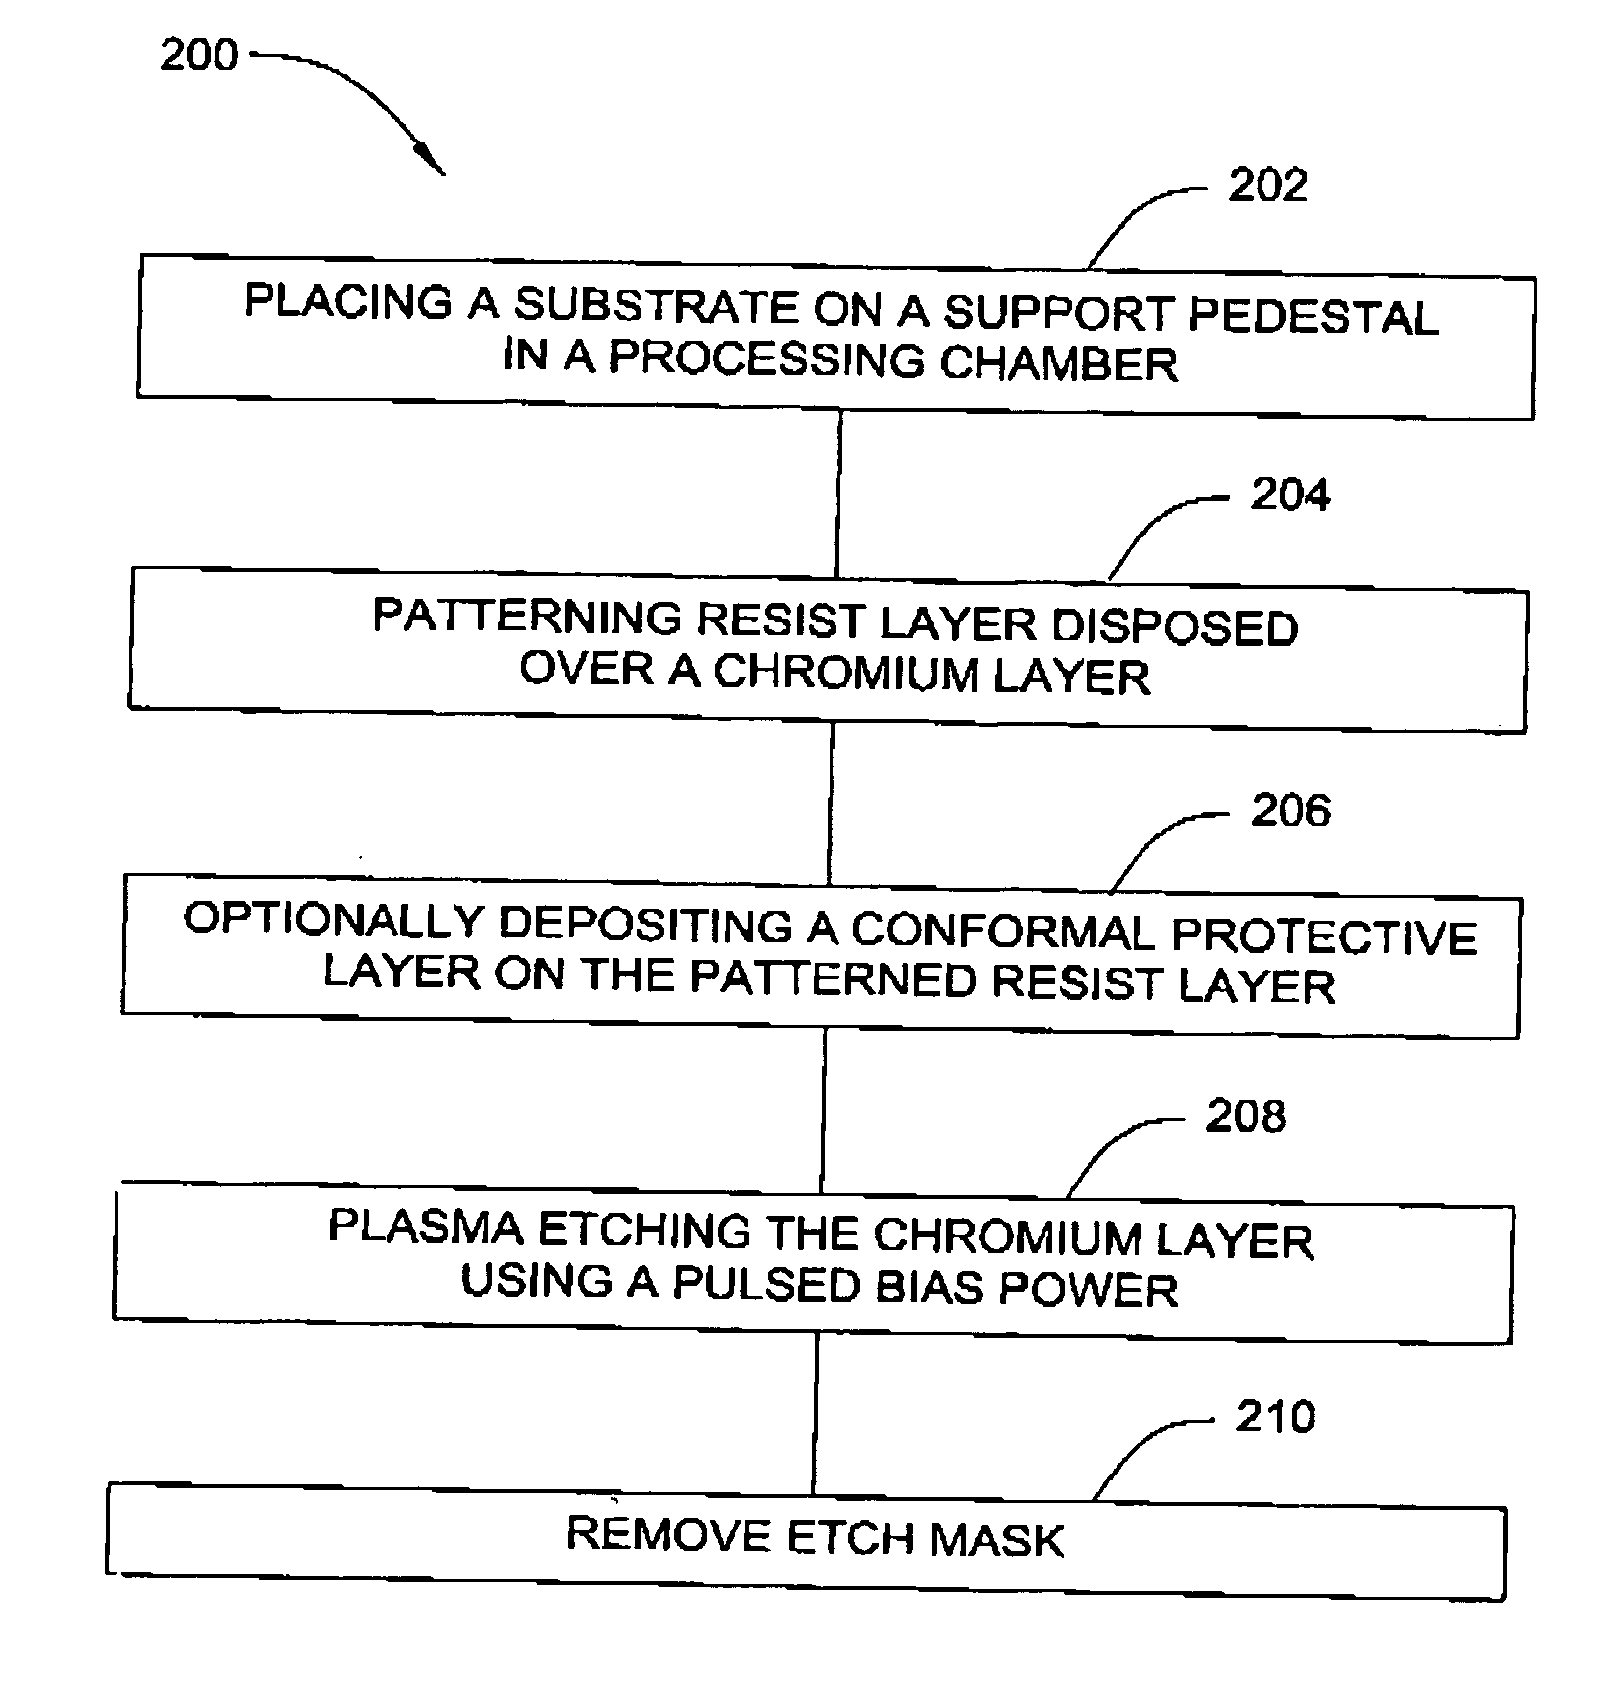 Method for plasma etching a chromium layer suitable for photomask fabrication